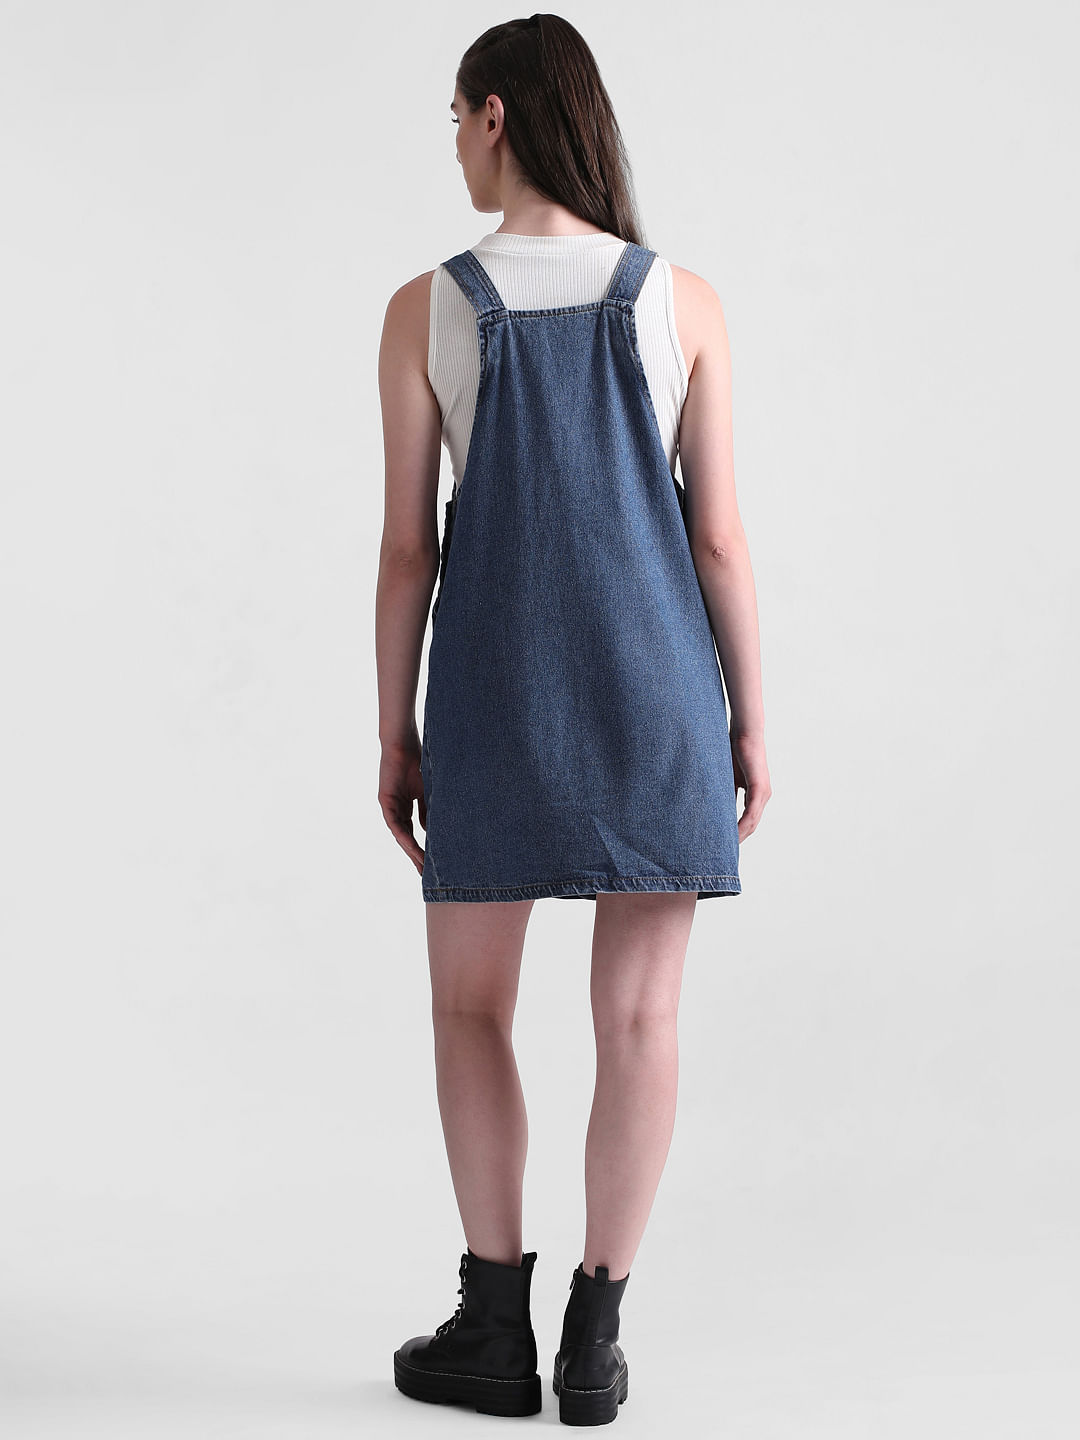 SHEIN SXY Flap Pocket Overall Denim Dress Without Tube Top | SHEIN USA